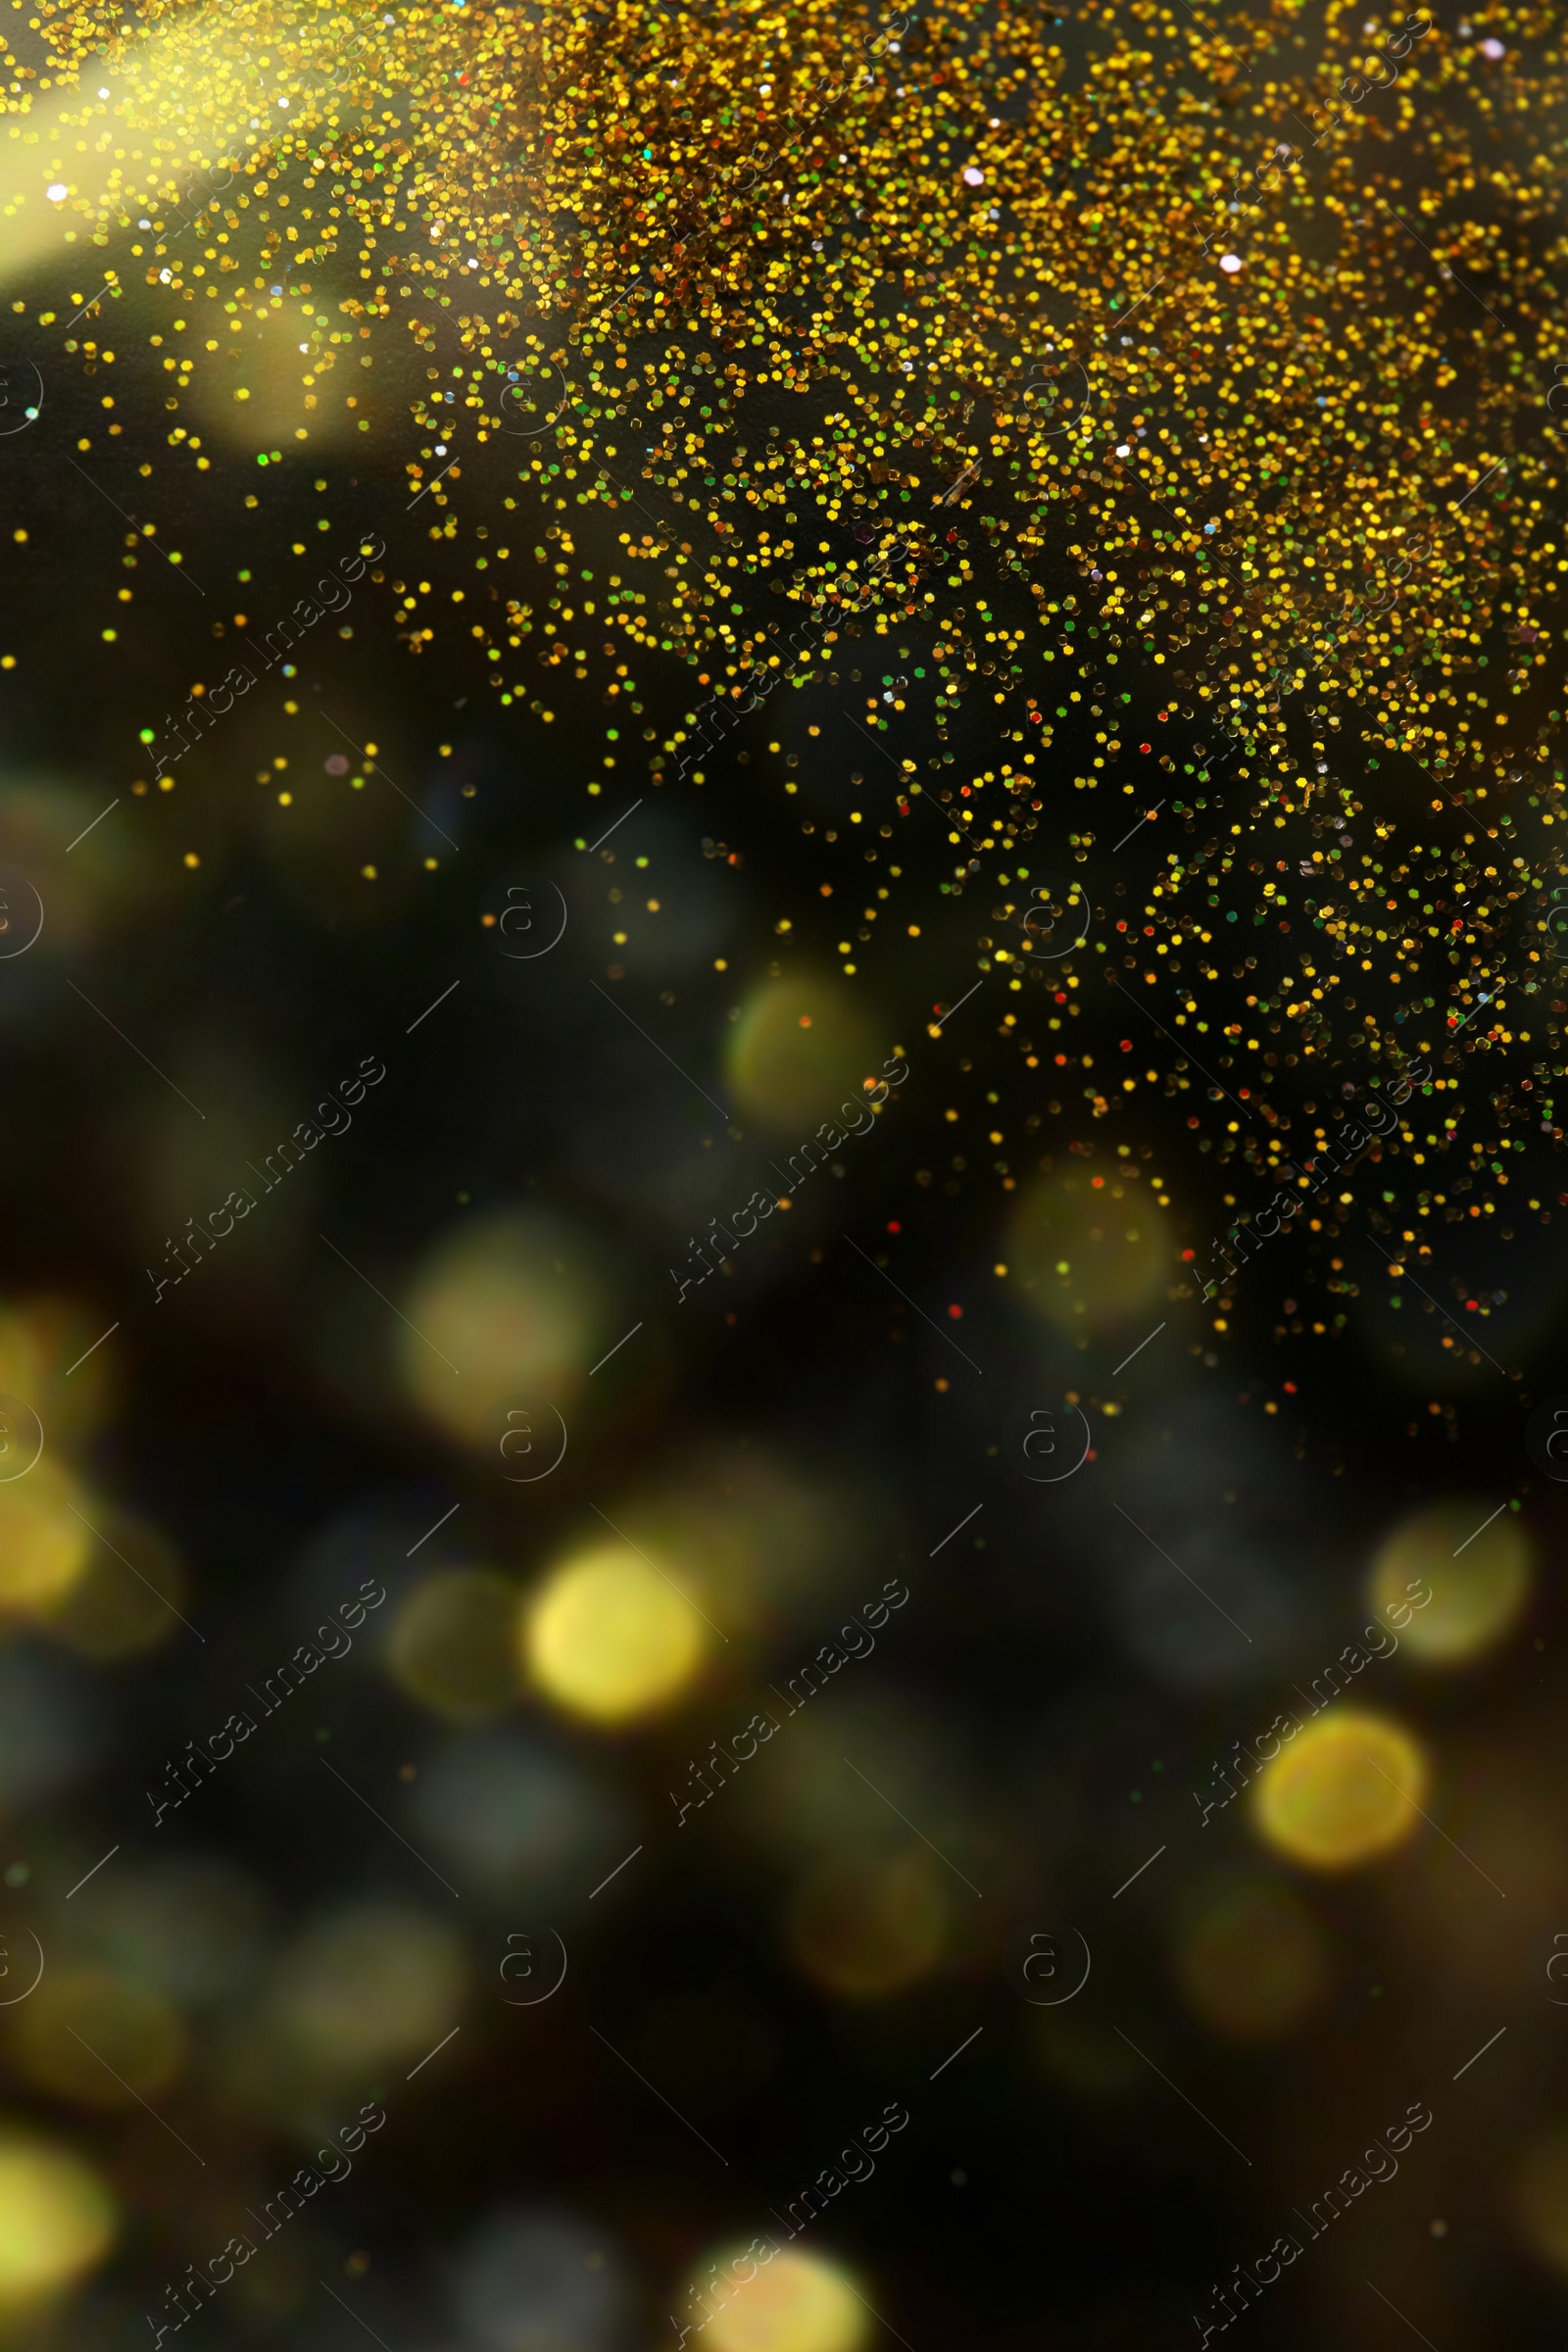 Photo of Shiny golden glitter on blurred background with bokeh effect. Space for text